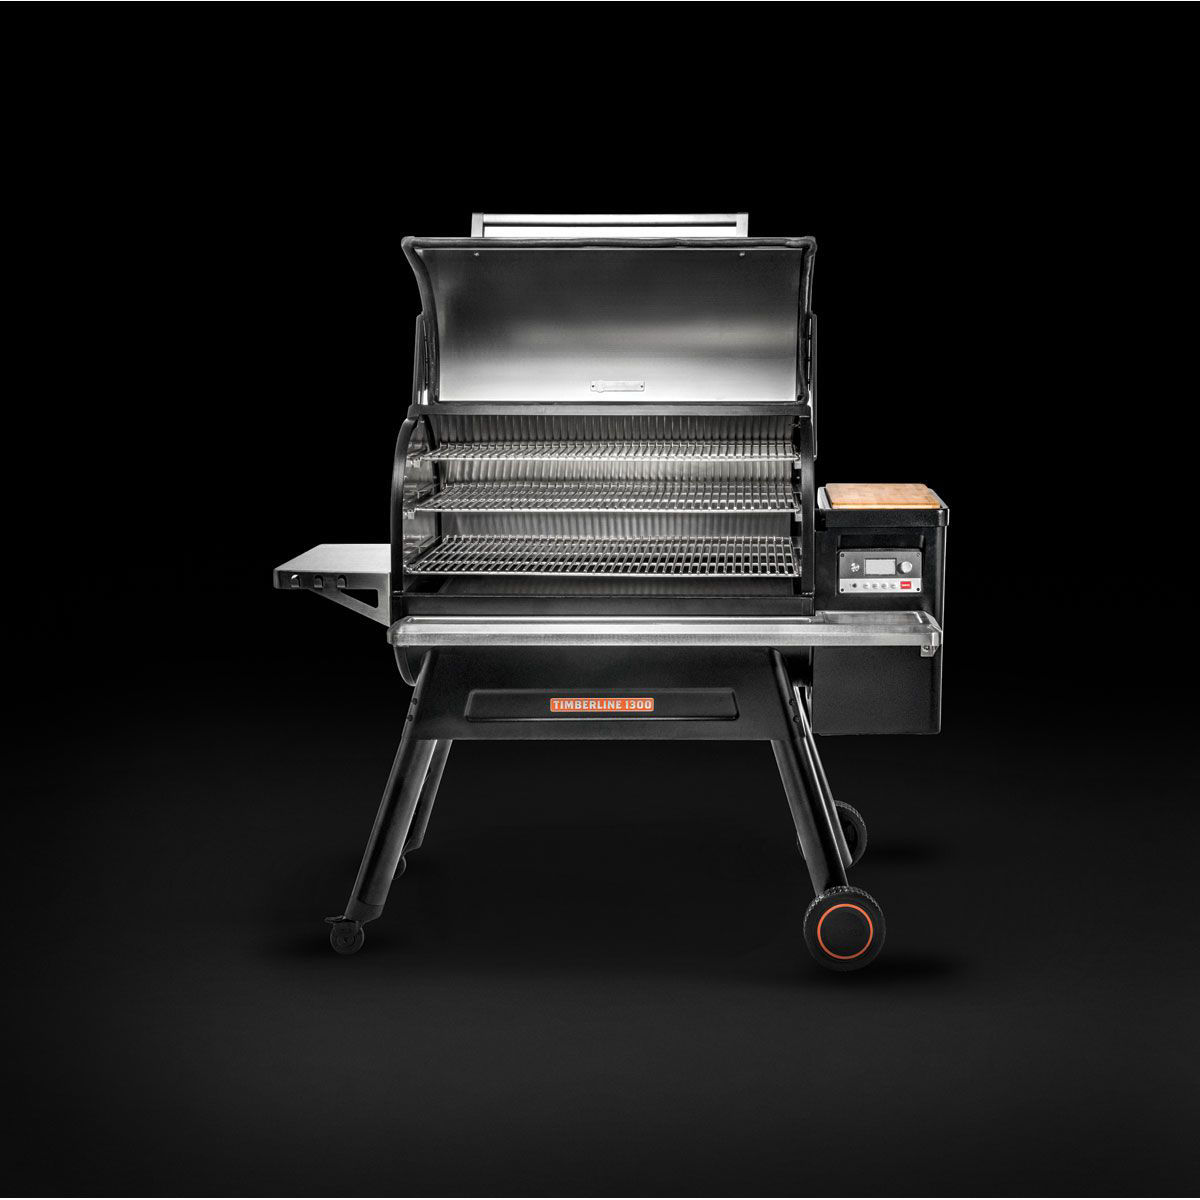 Traeger's redesigned Timberline is full of smart grilling tech